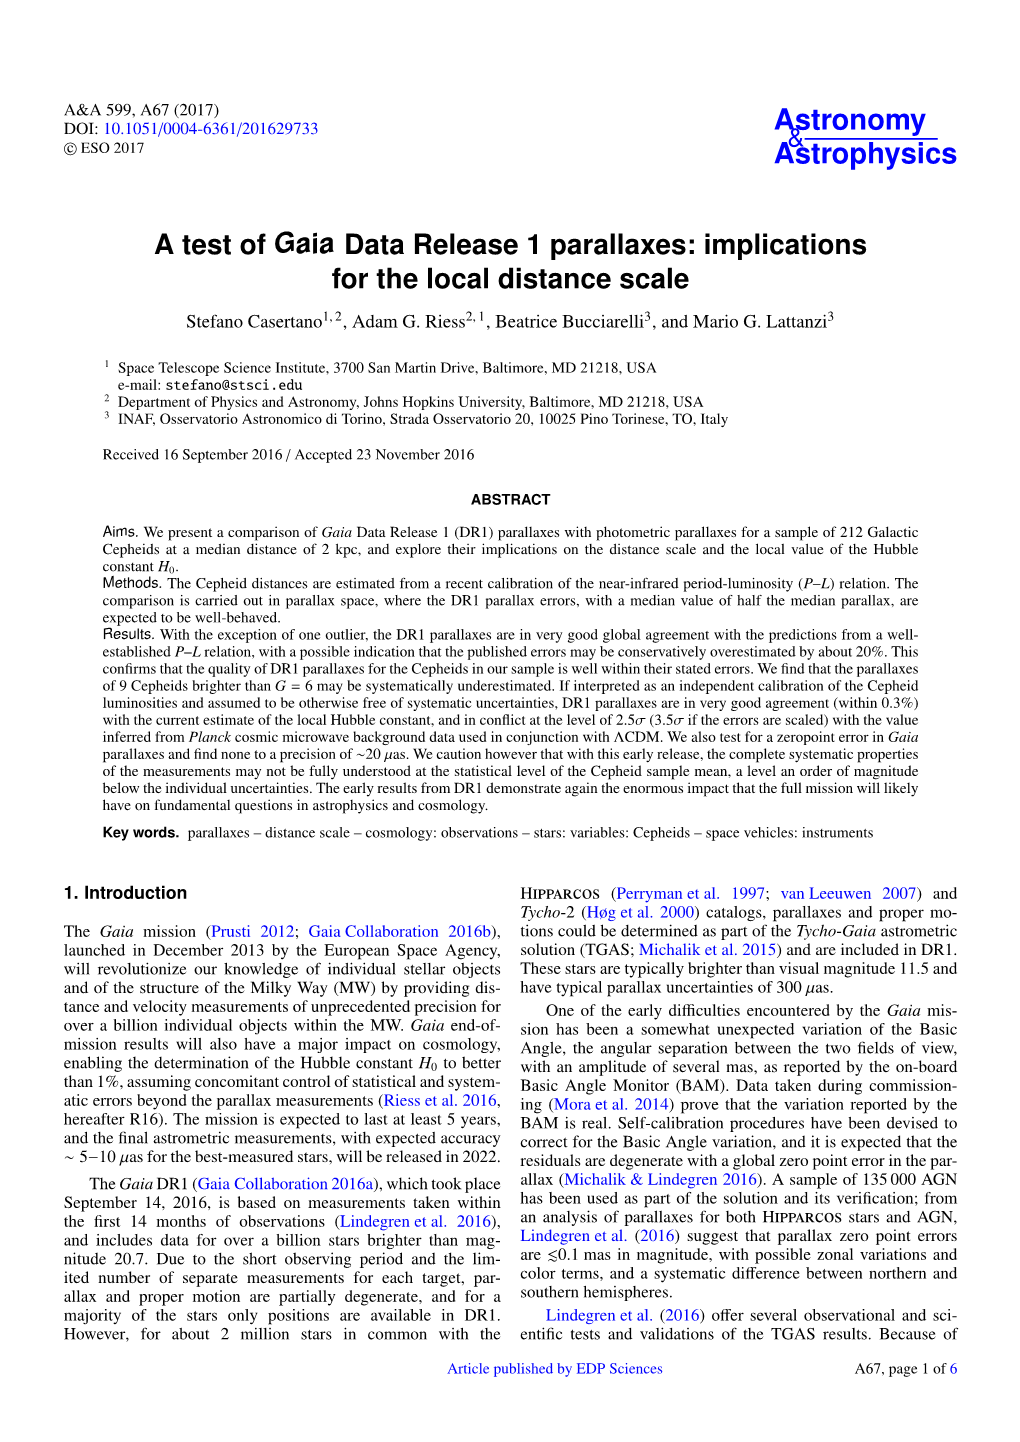 A Test of Gaia Data Release 1 Parallaxes: Implications for the Local Distance Scale Stefano Casertano1, 2, Adam G